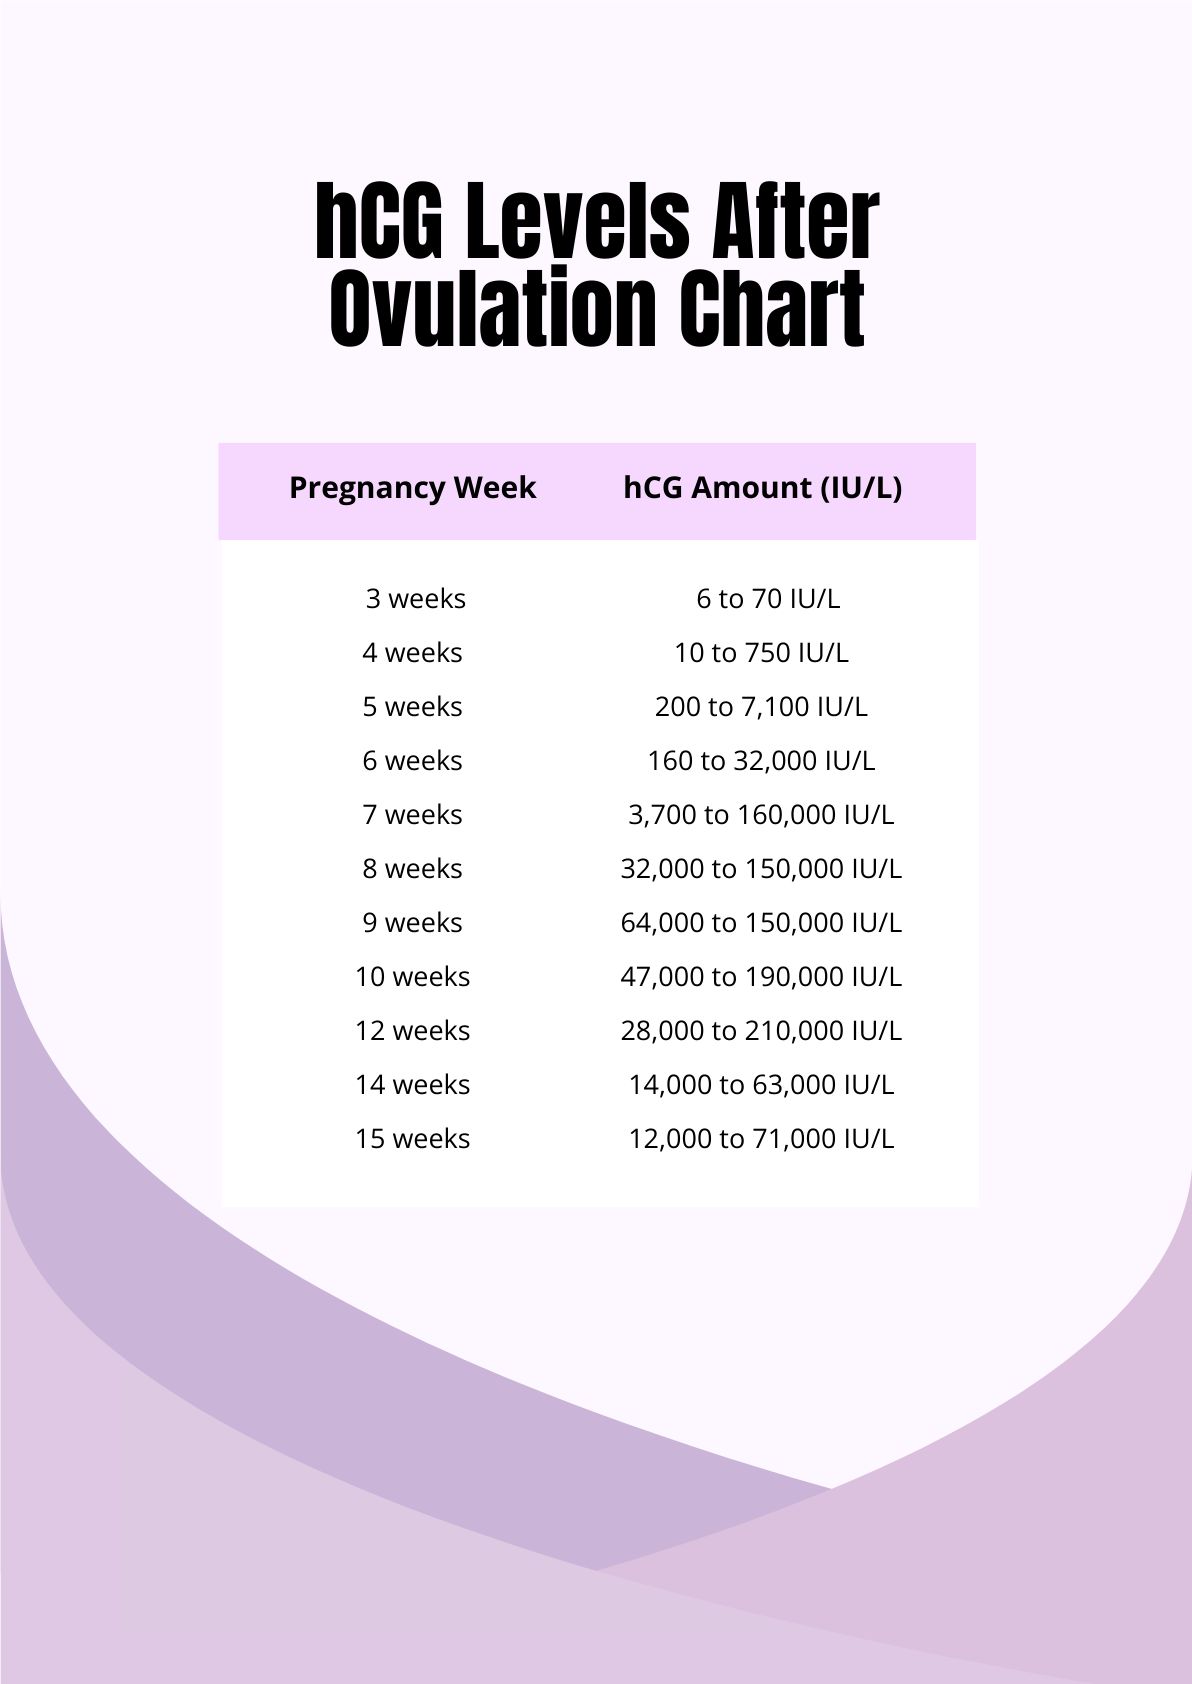 HCG Levels After Ovulation Chart in PDF